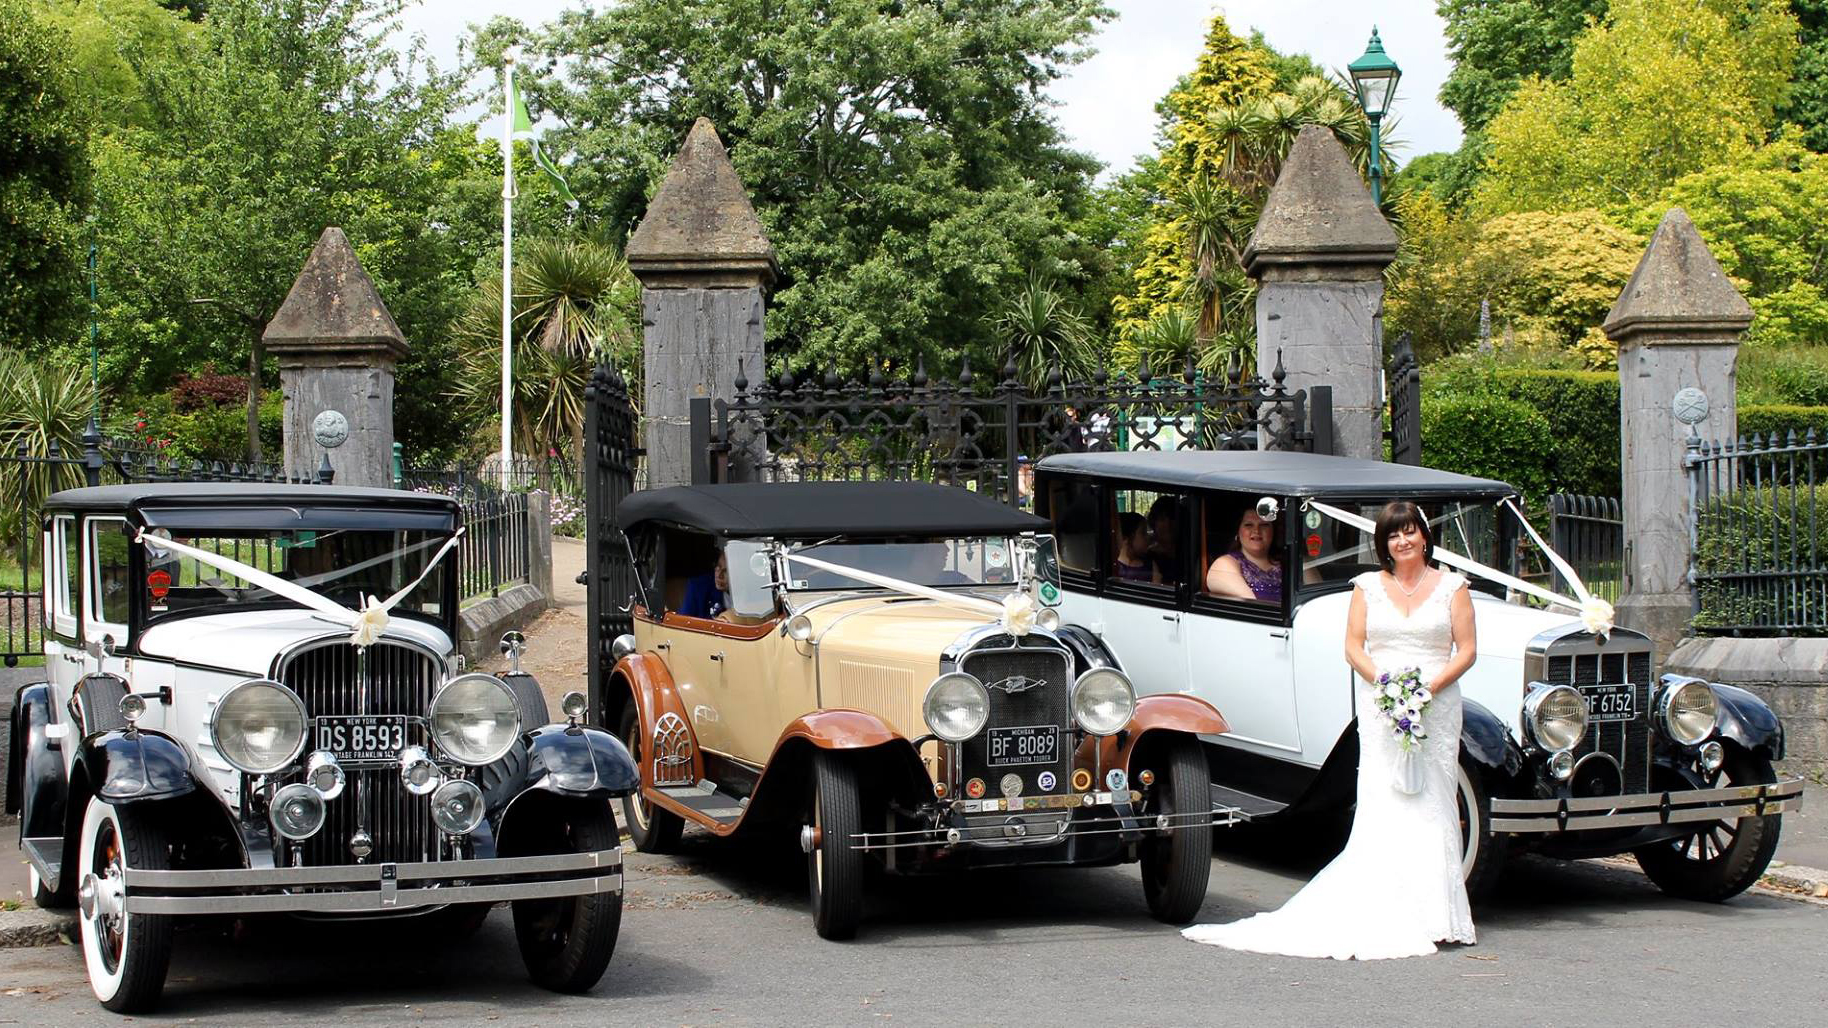 Three vintage wedding cars decorated with white ribbons at a local Newton Abbot wedding. All three vehicles are parked side-by-side with bride wearing a white dress holding a brida